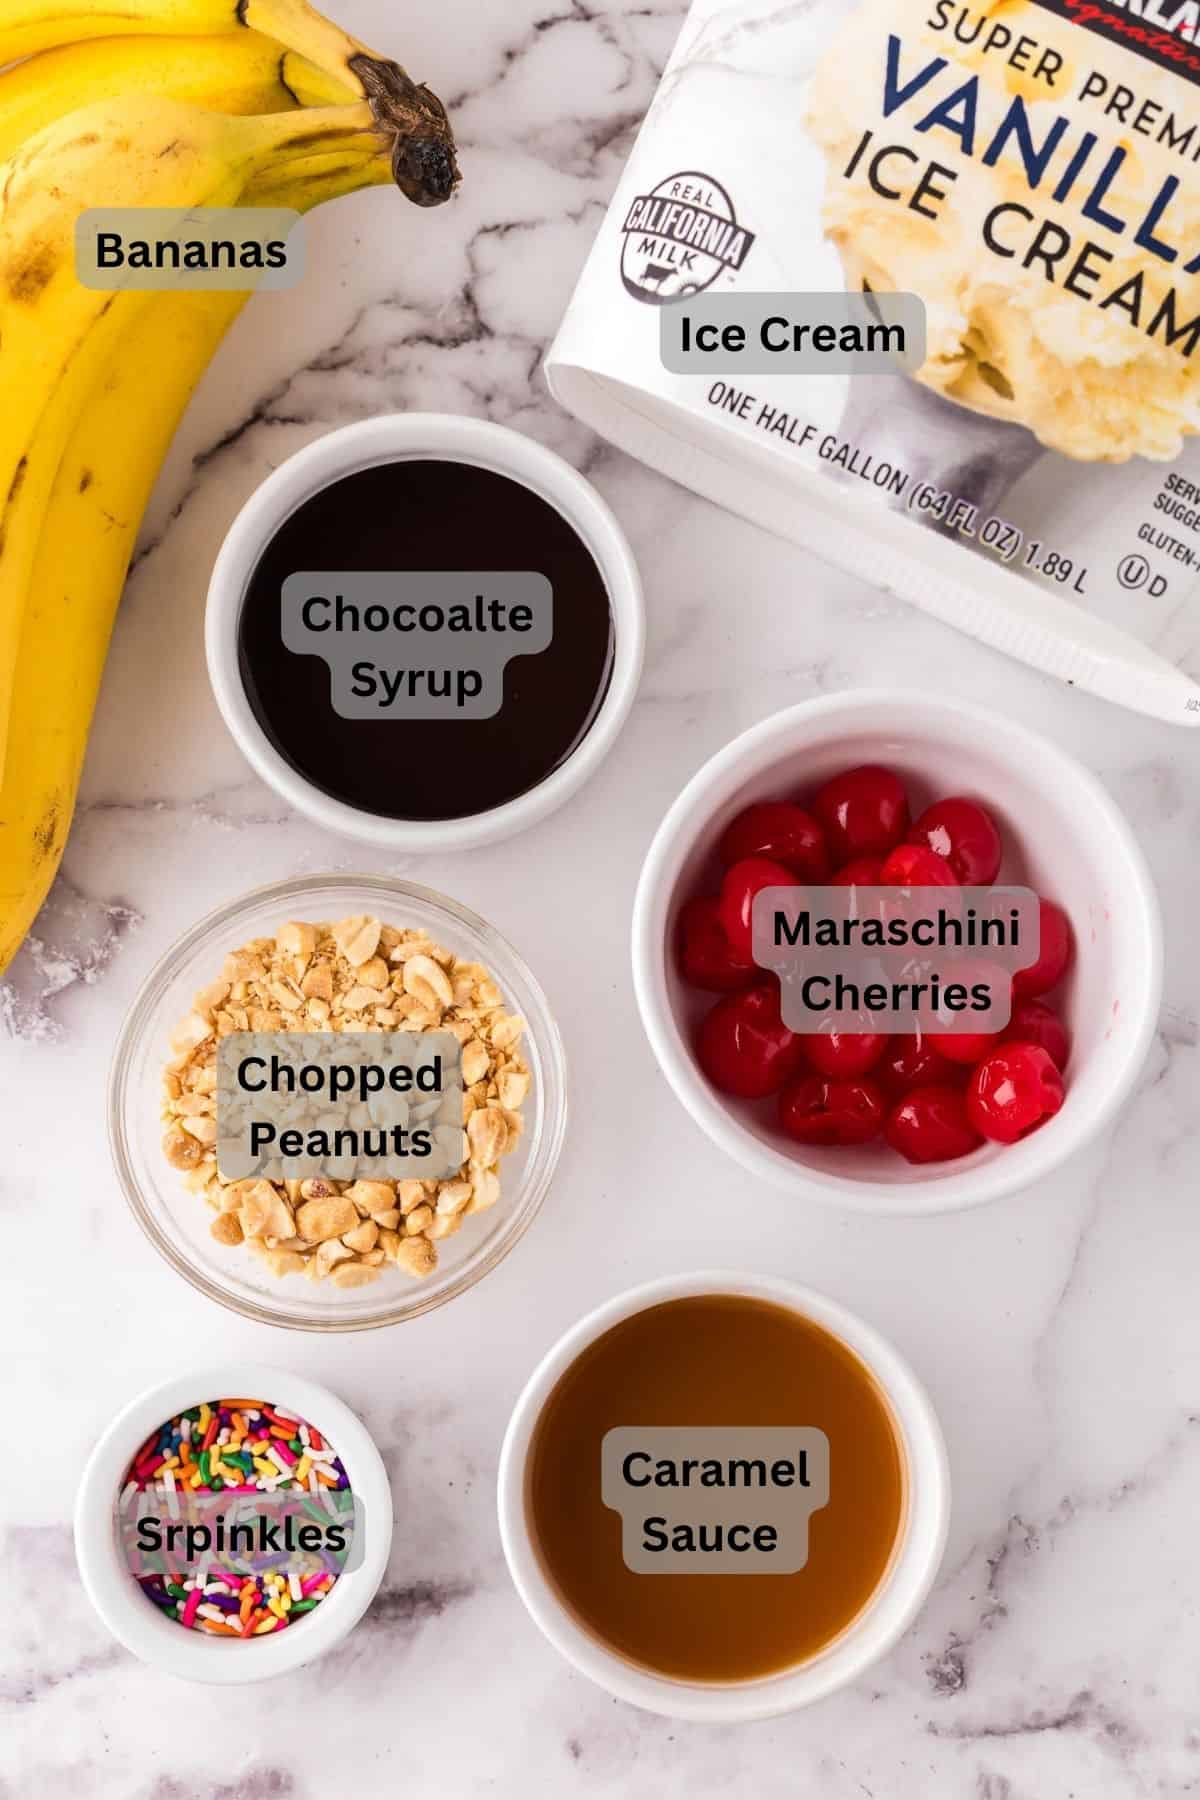 digitally labeled portion bowls each with raw ingredient to make a classic banana split.